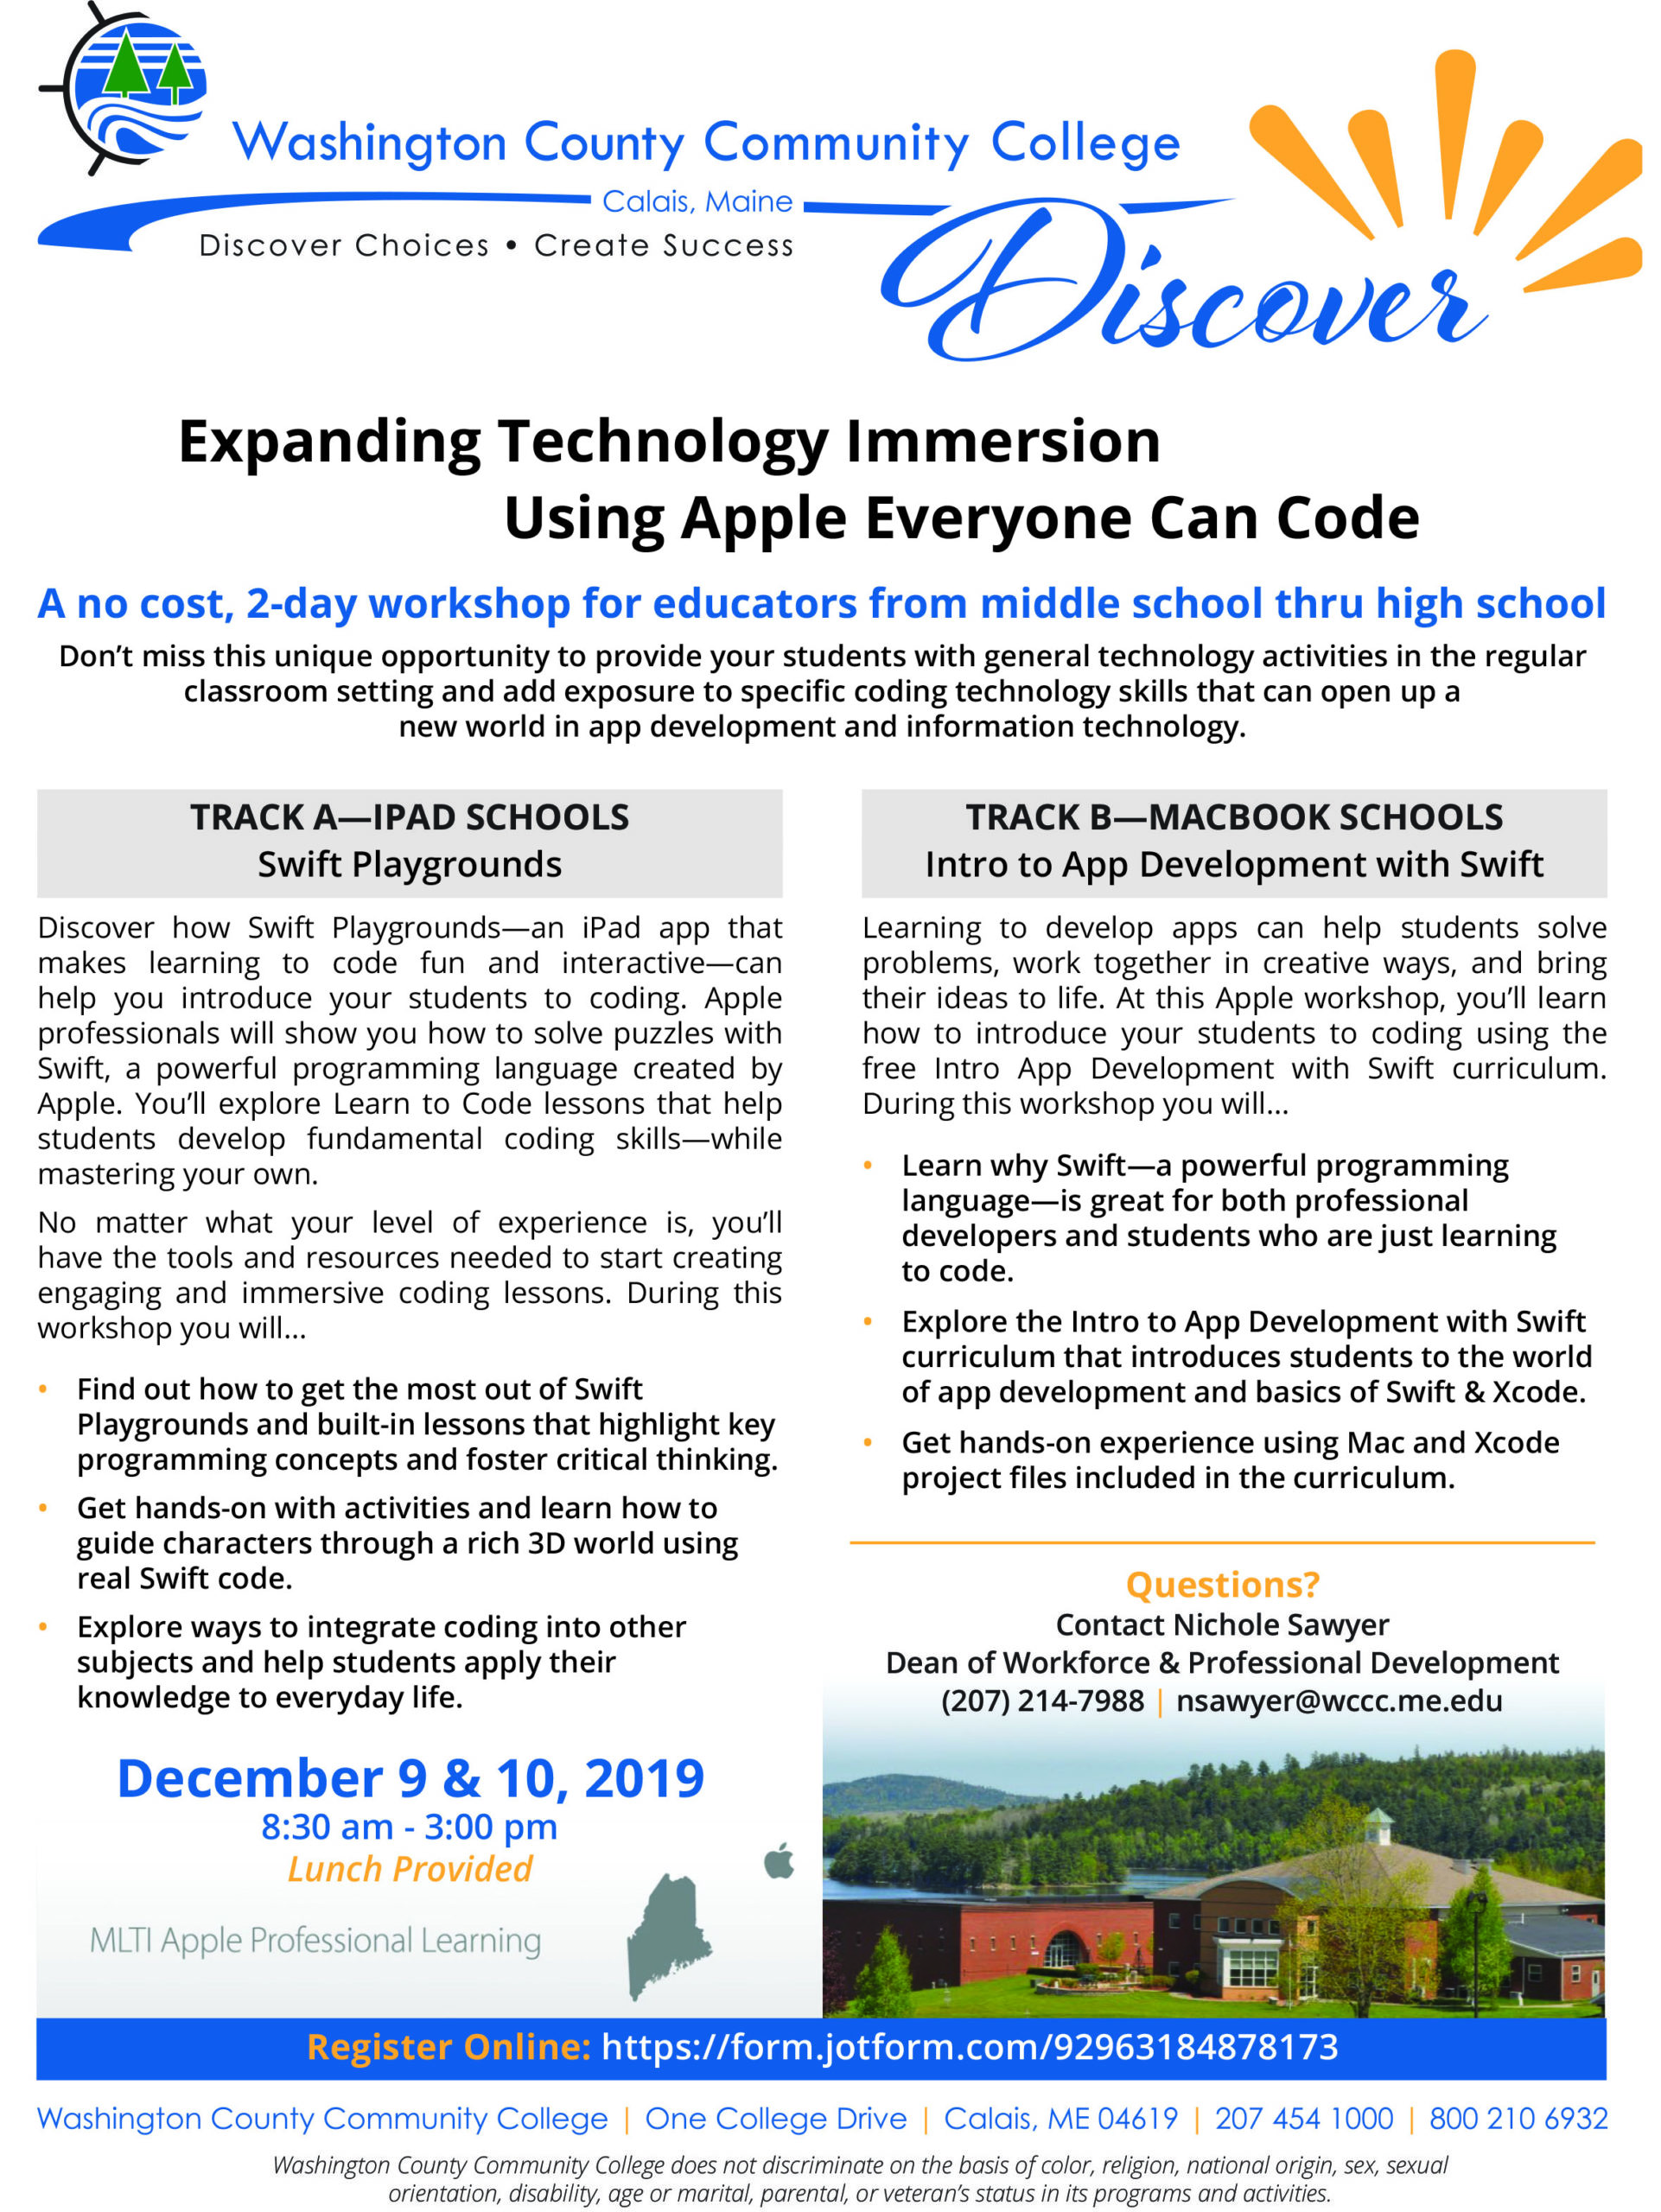 Expanding Technology Immersion Using Apple Everyone Can Code - Washington  County Community College